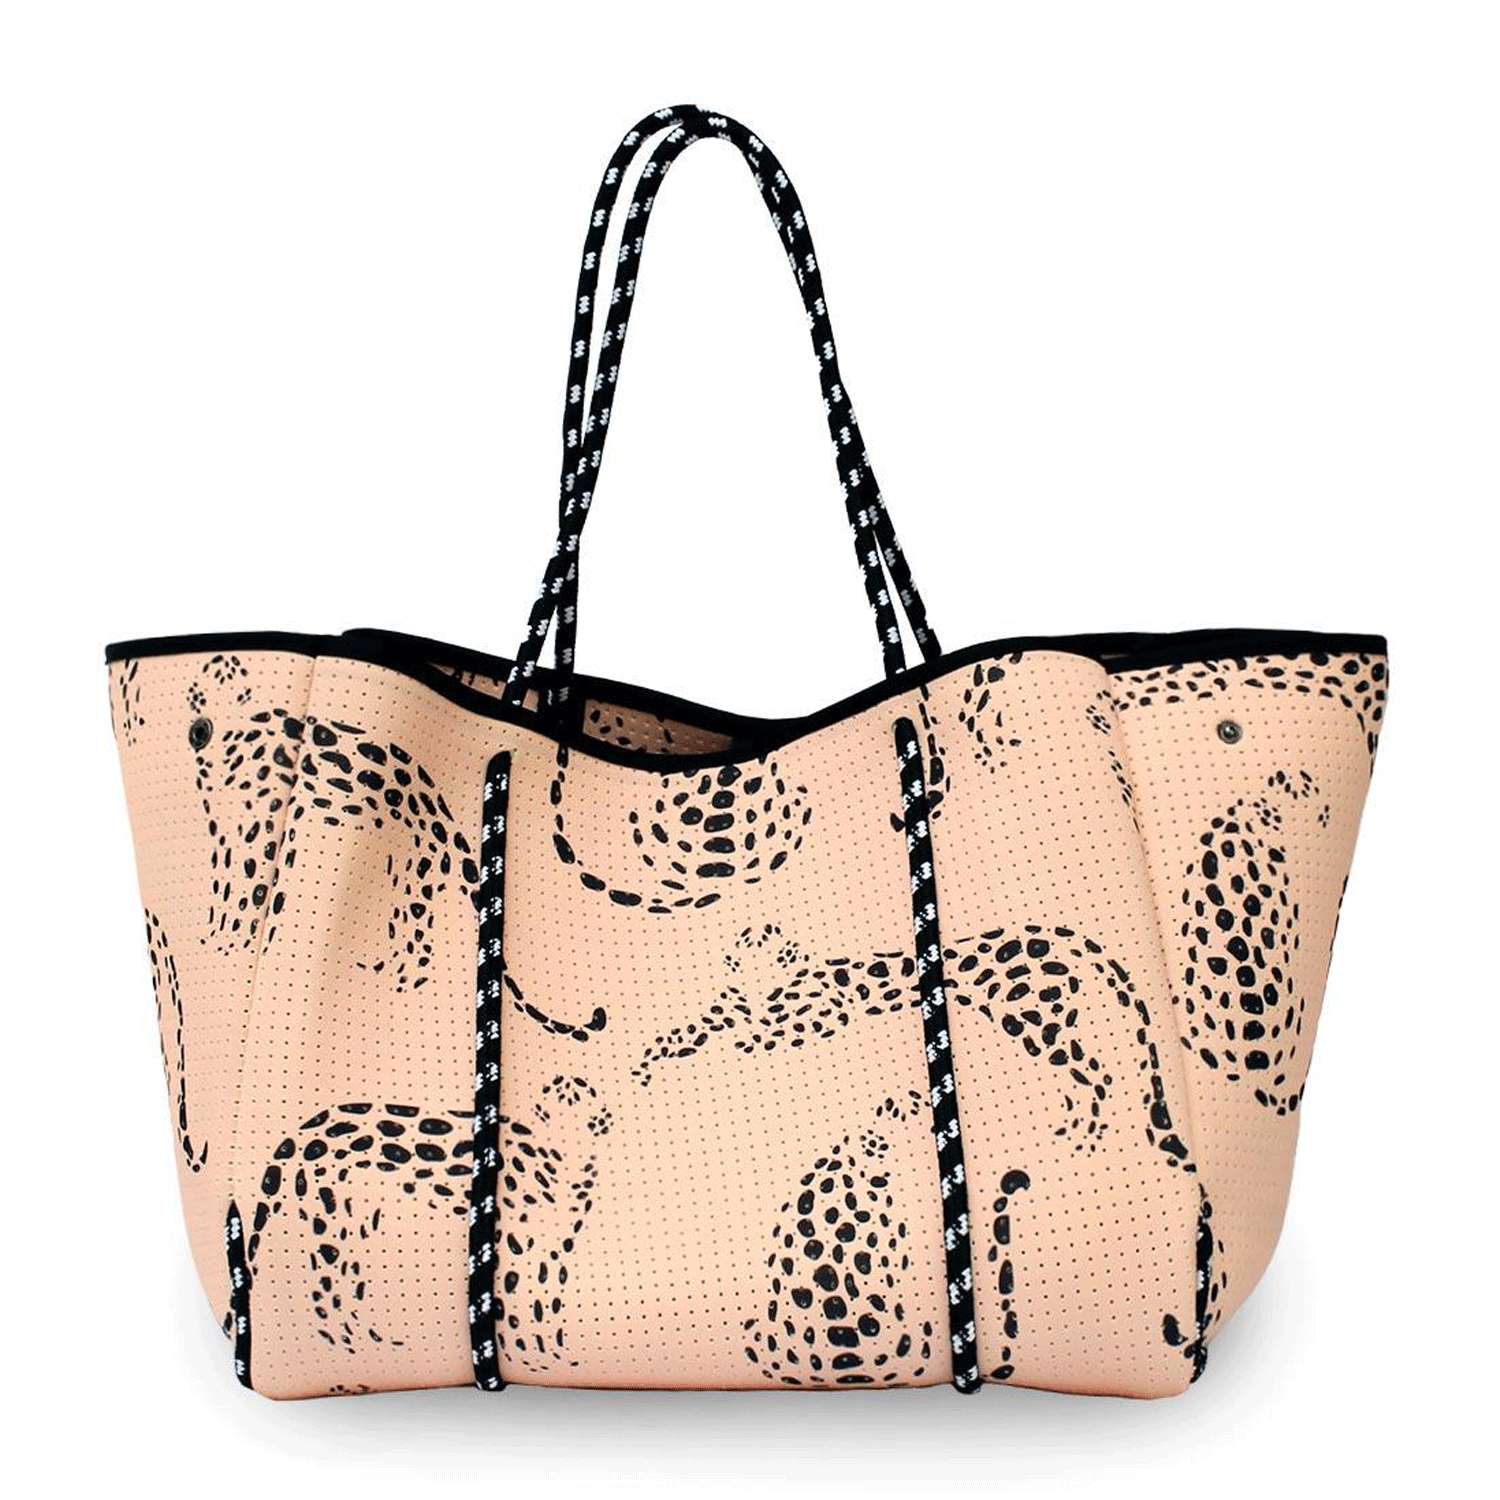 Printed Pu Leather Branded Premium Quality Large Chain Travel Tote Bag